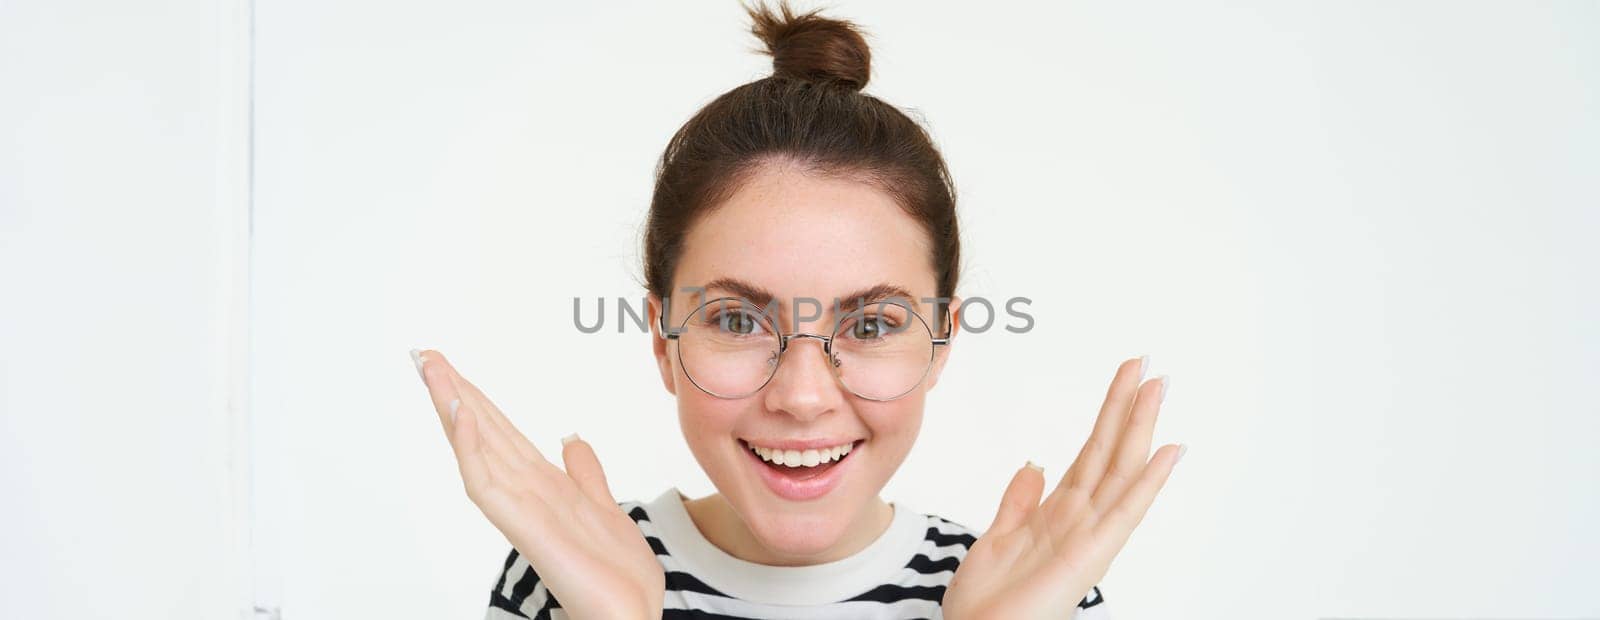 Close up portrait of amazed, happy young woman in glasses, clasp hands, applause, clapping and smiling, standing over white background.